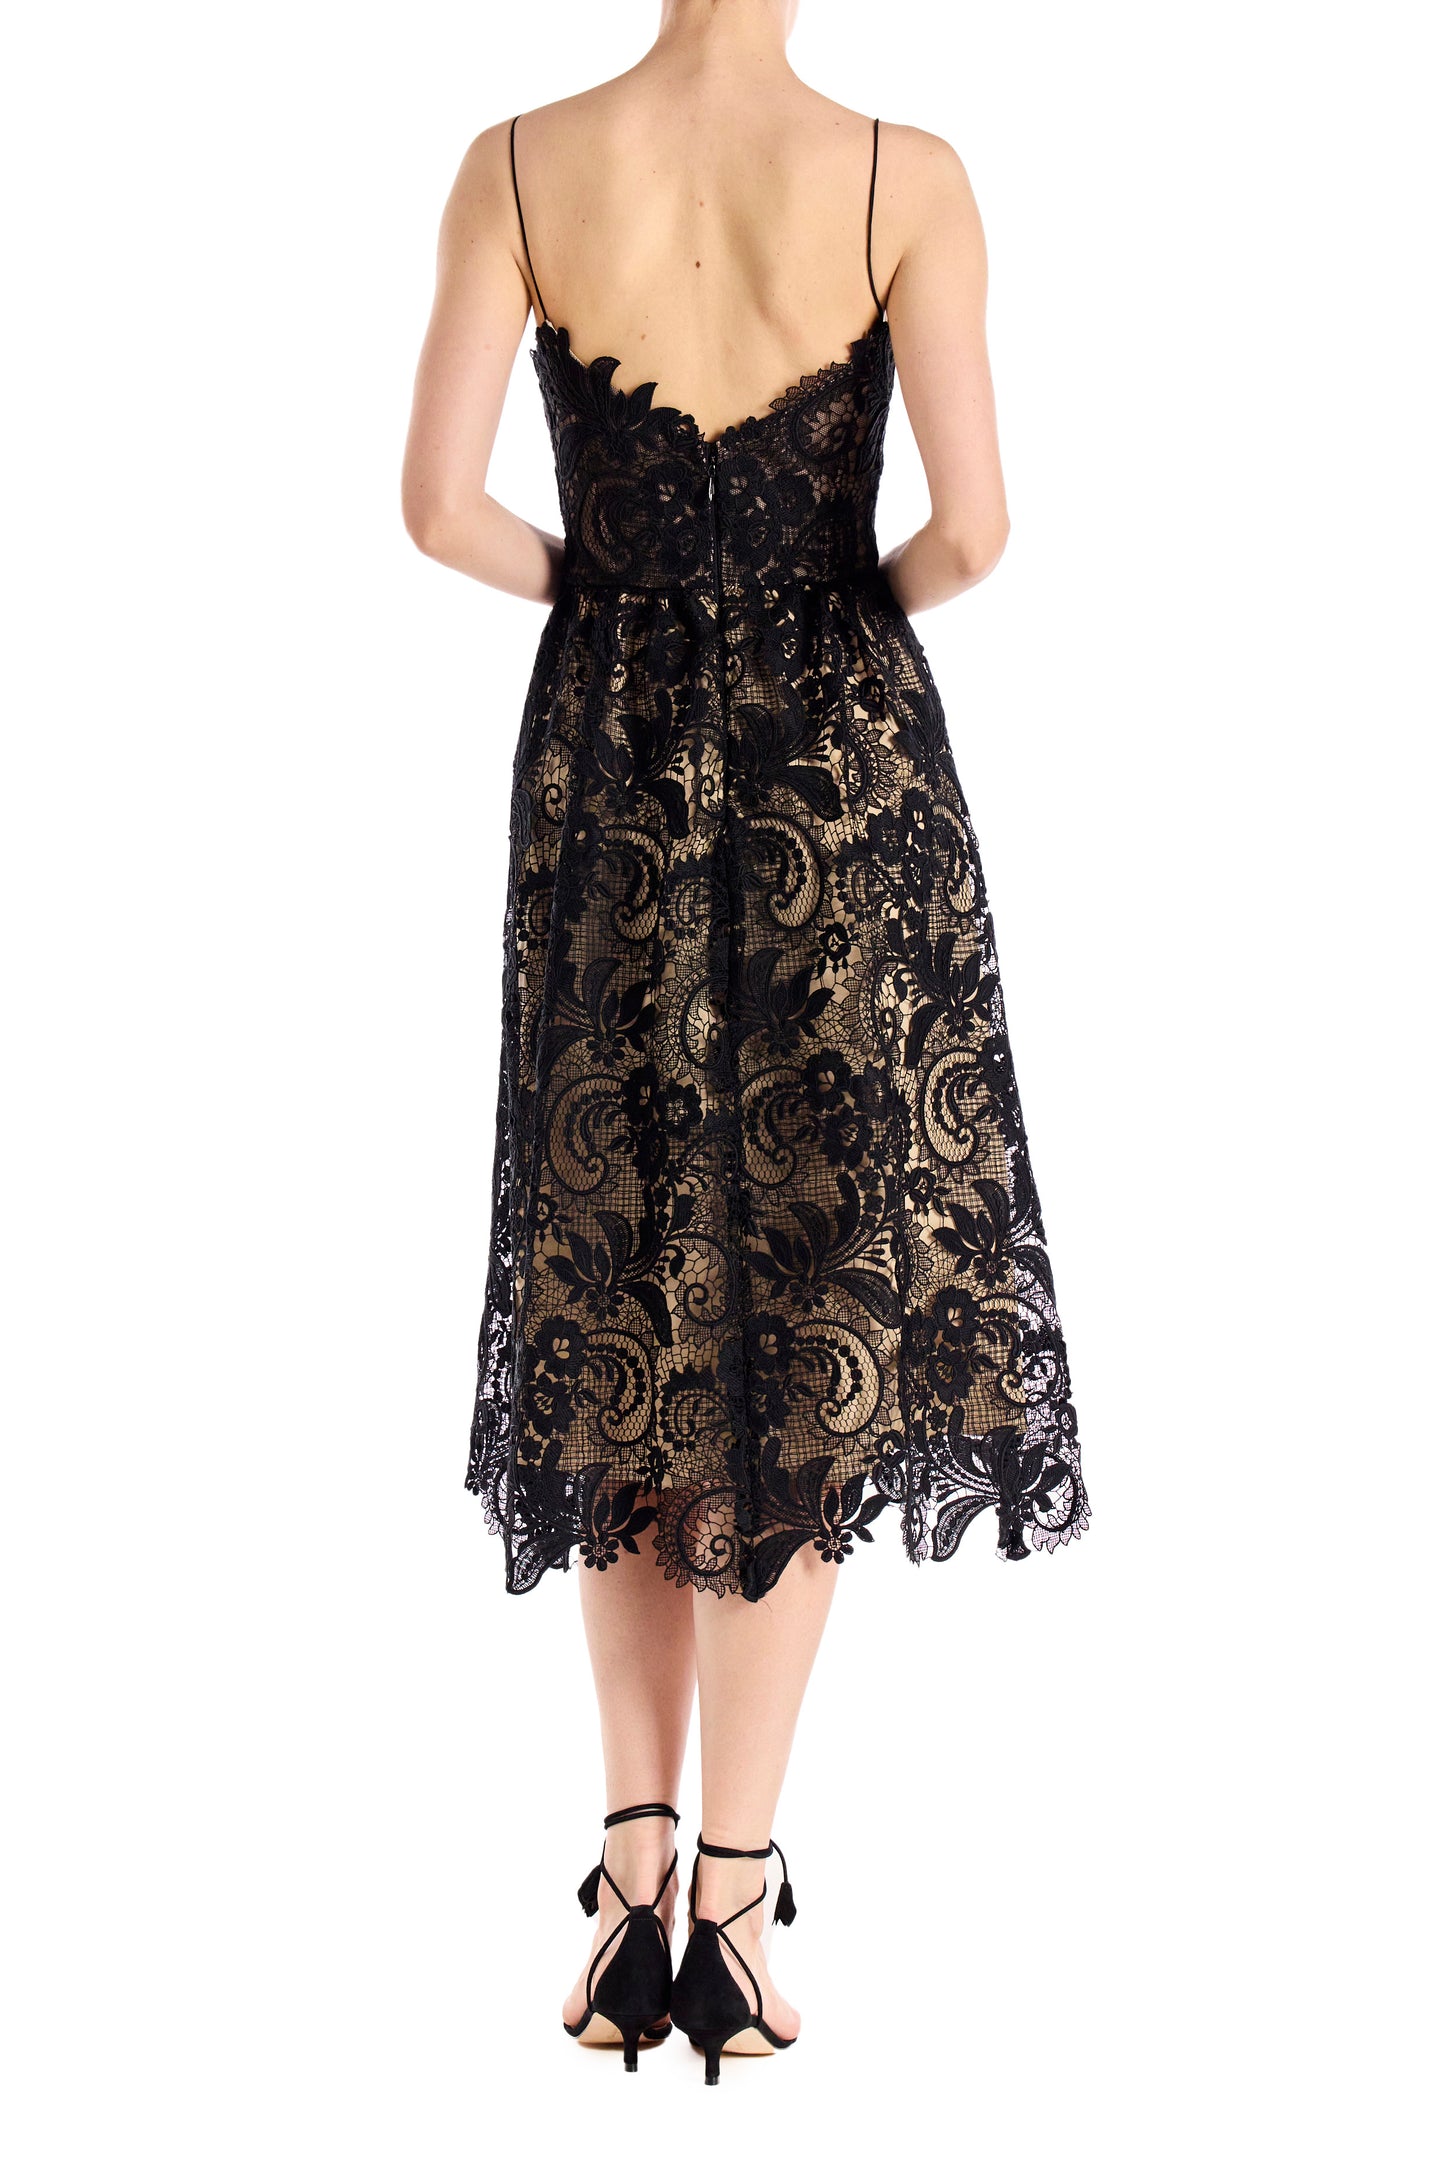 Black lace midi dress with spaghetti straps and full skirt.  Nude lining under black lace.